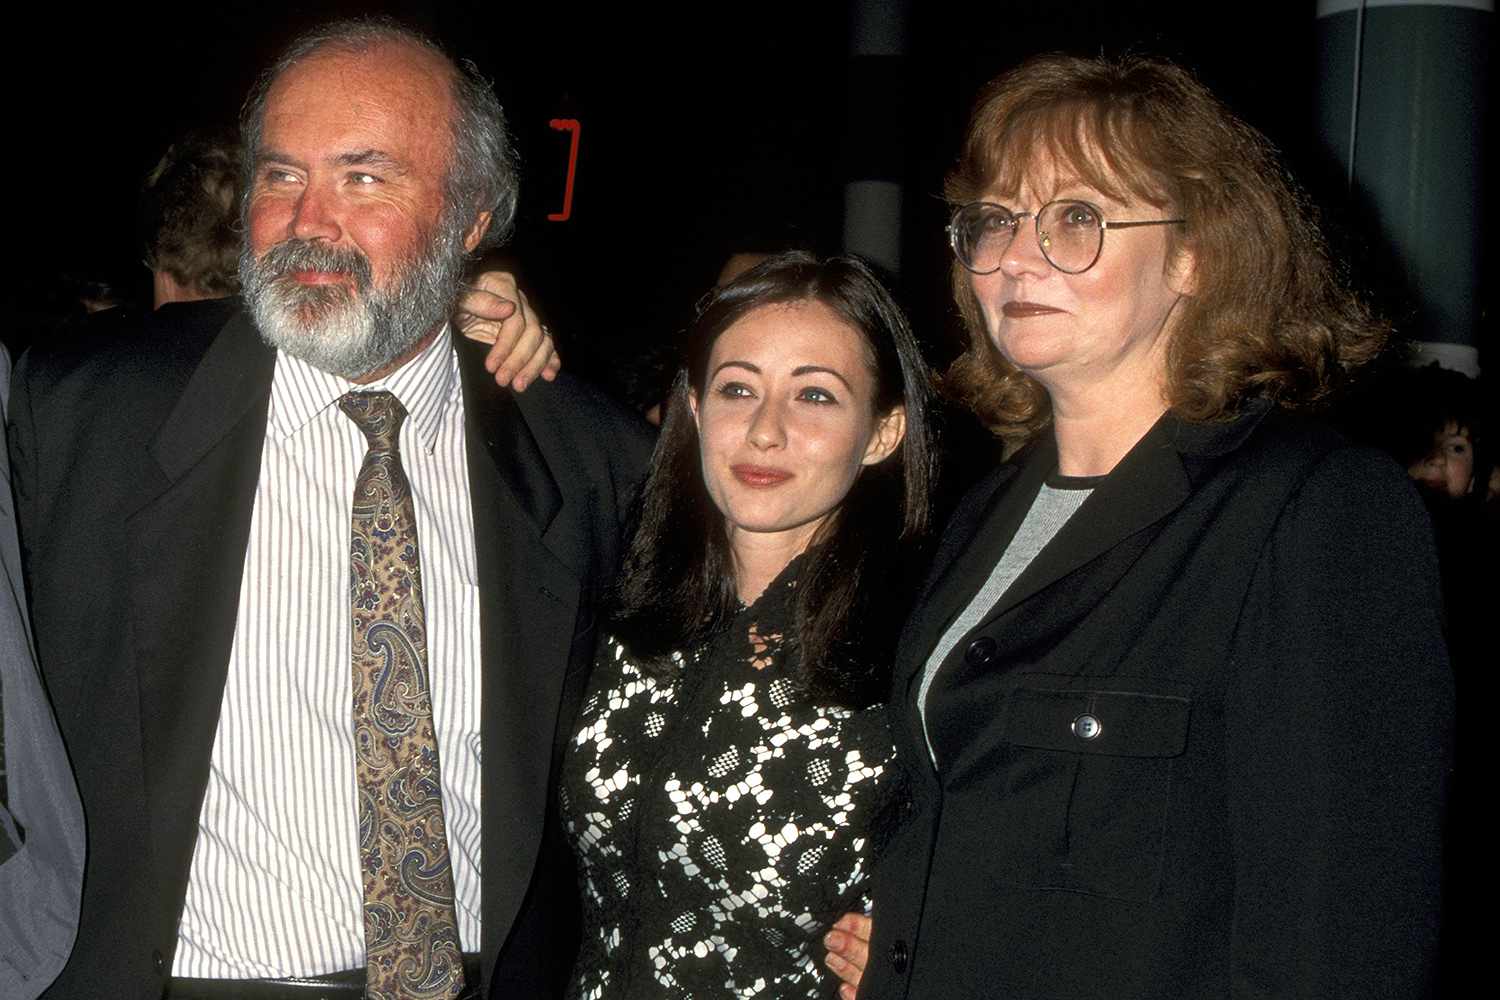 All About Shannen Doherty's Parents, John and Rosa Doherty